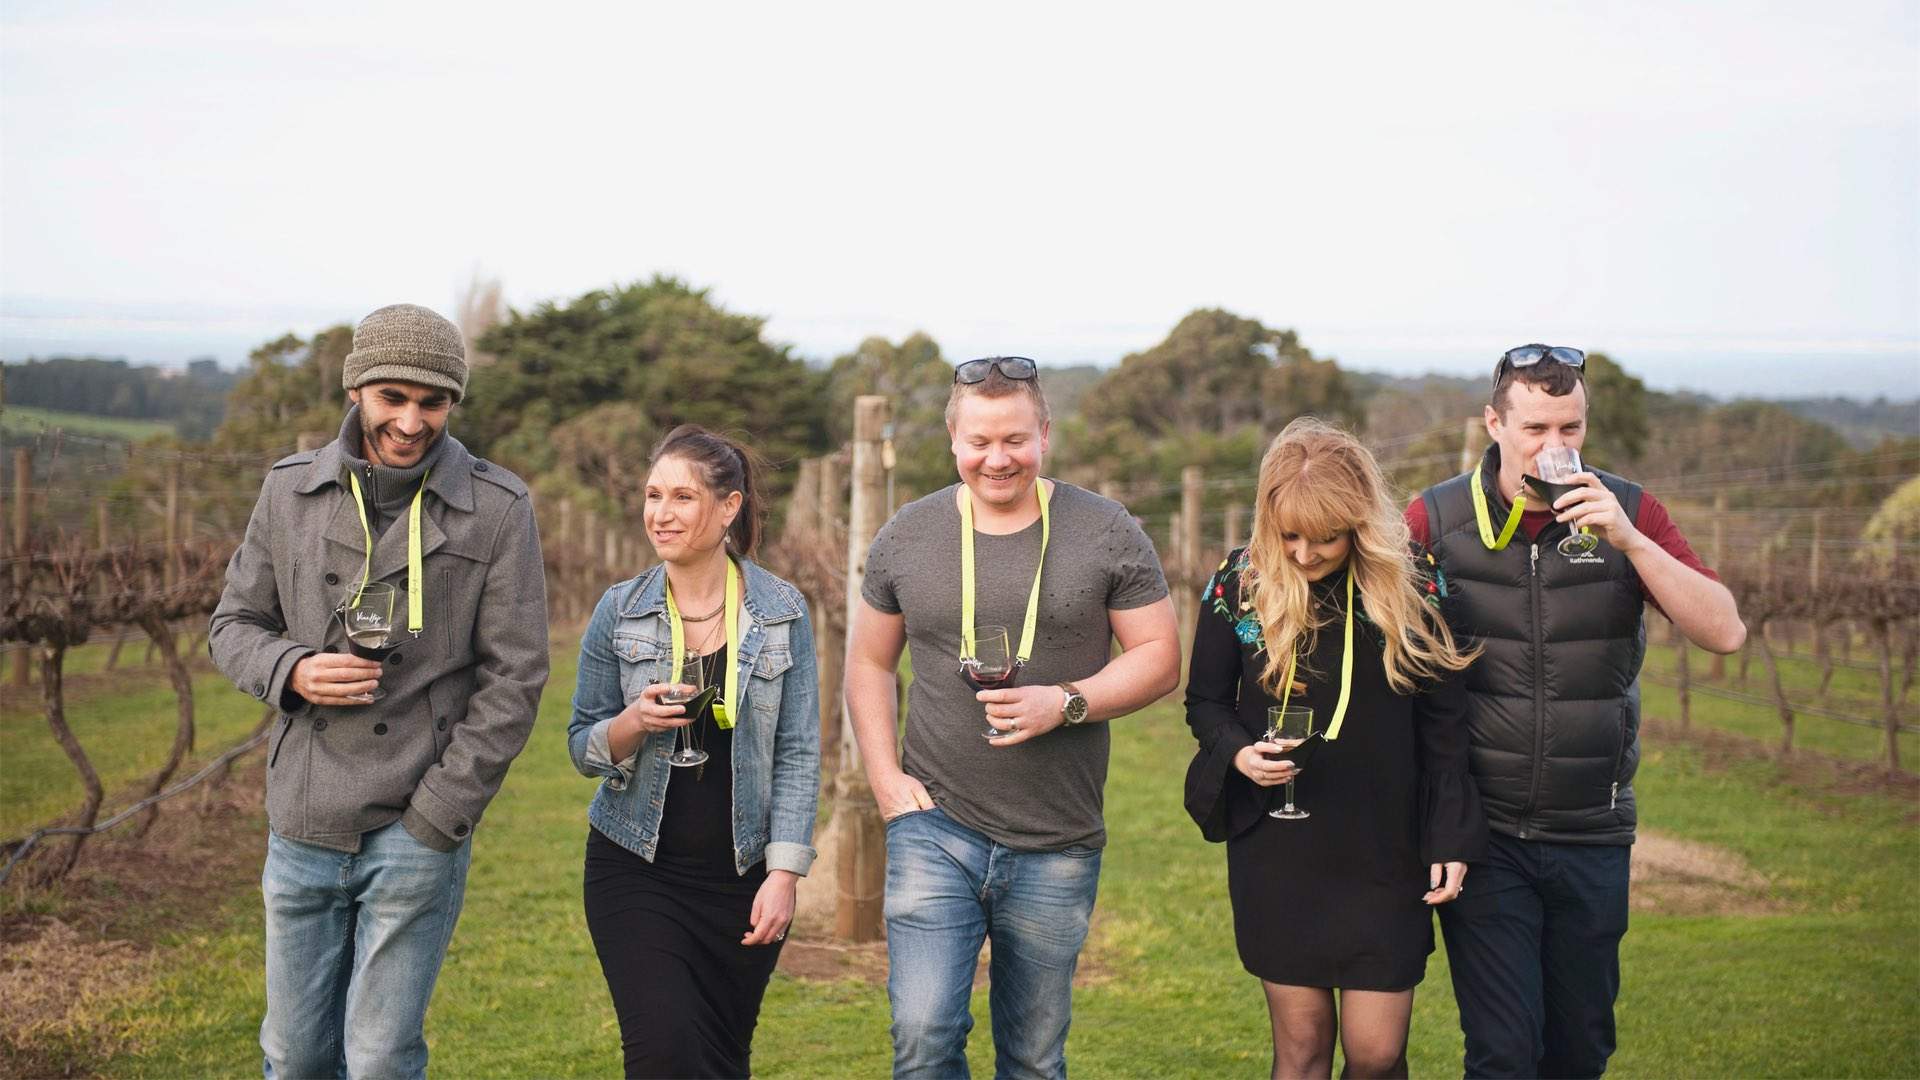 The Mornington Peninsula's Vinehop Festival Will Return for a Second Year